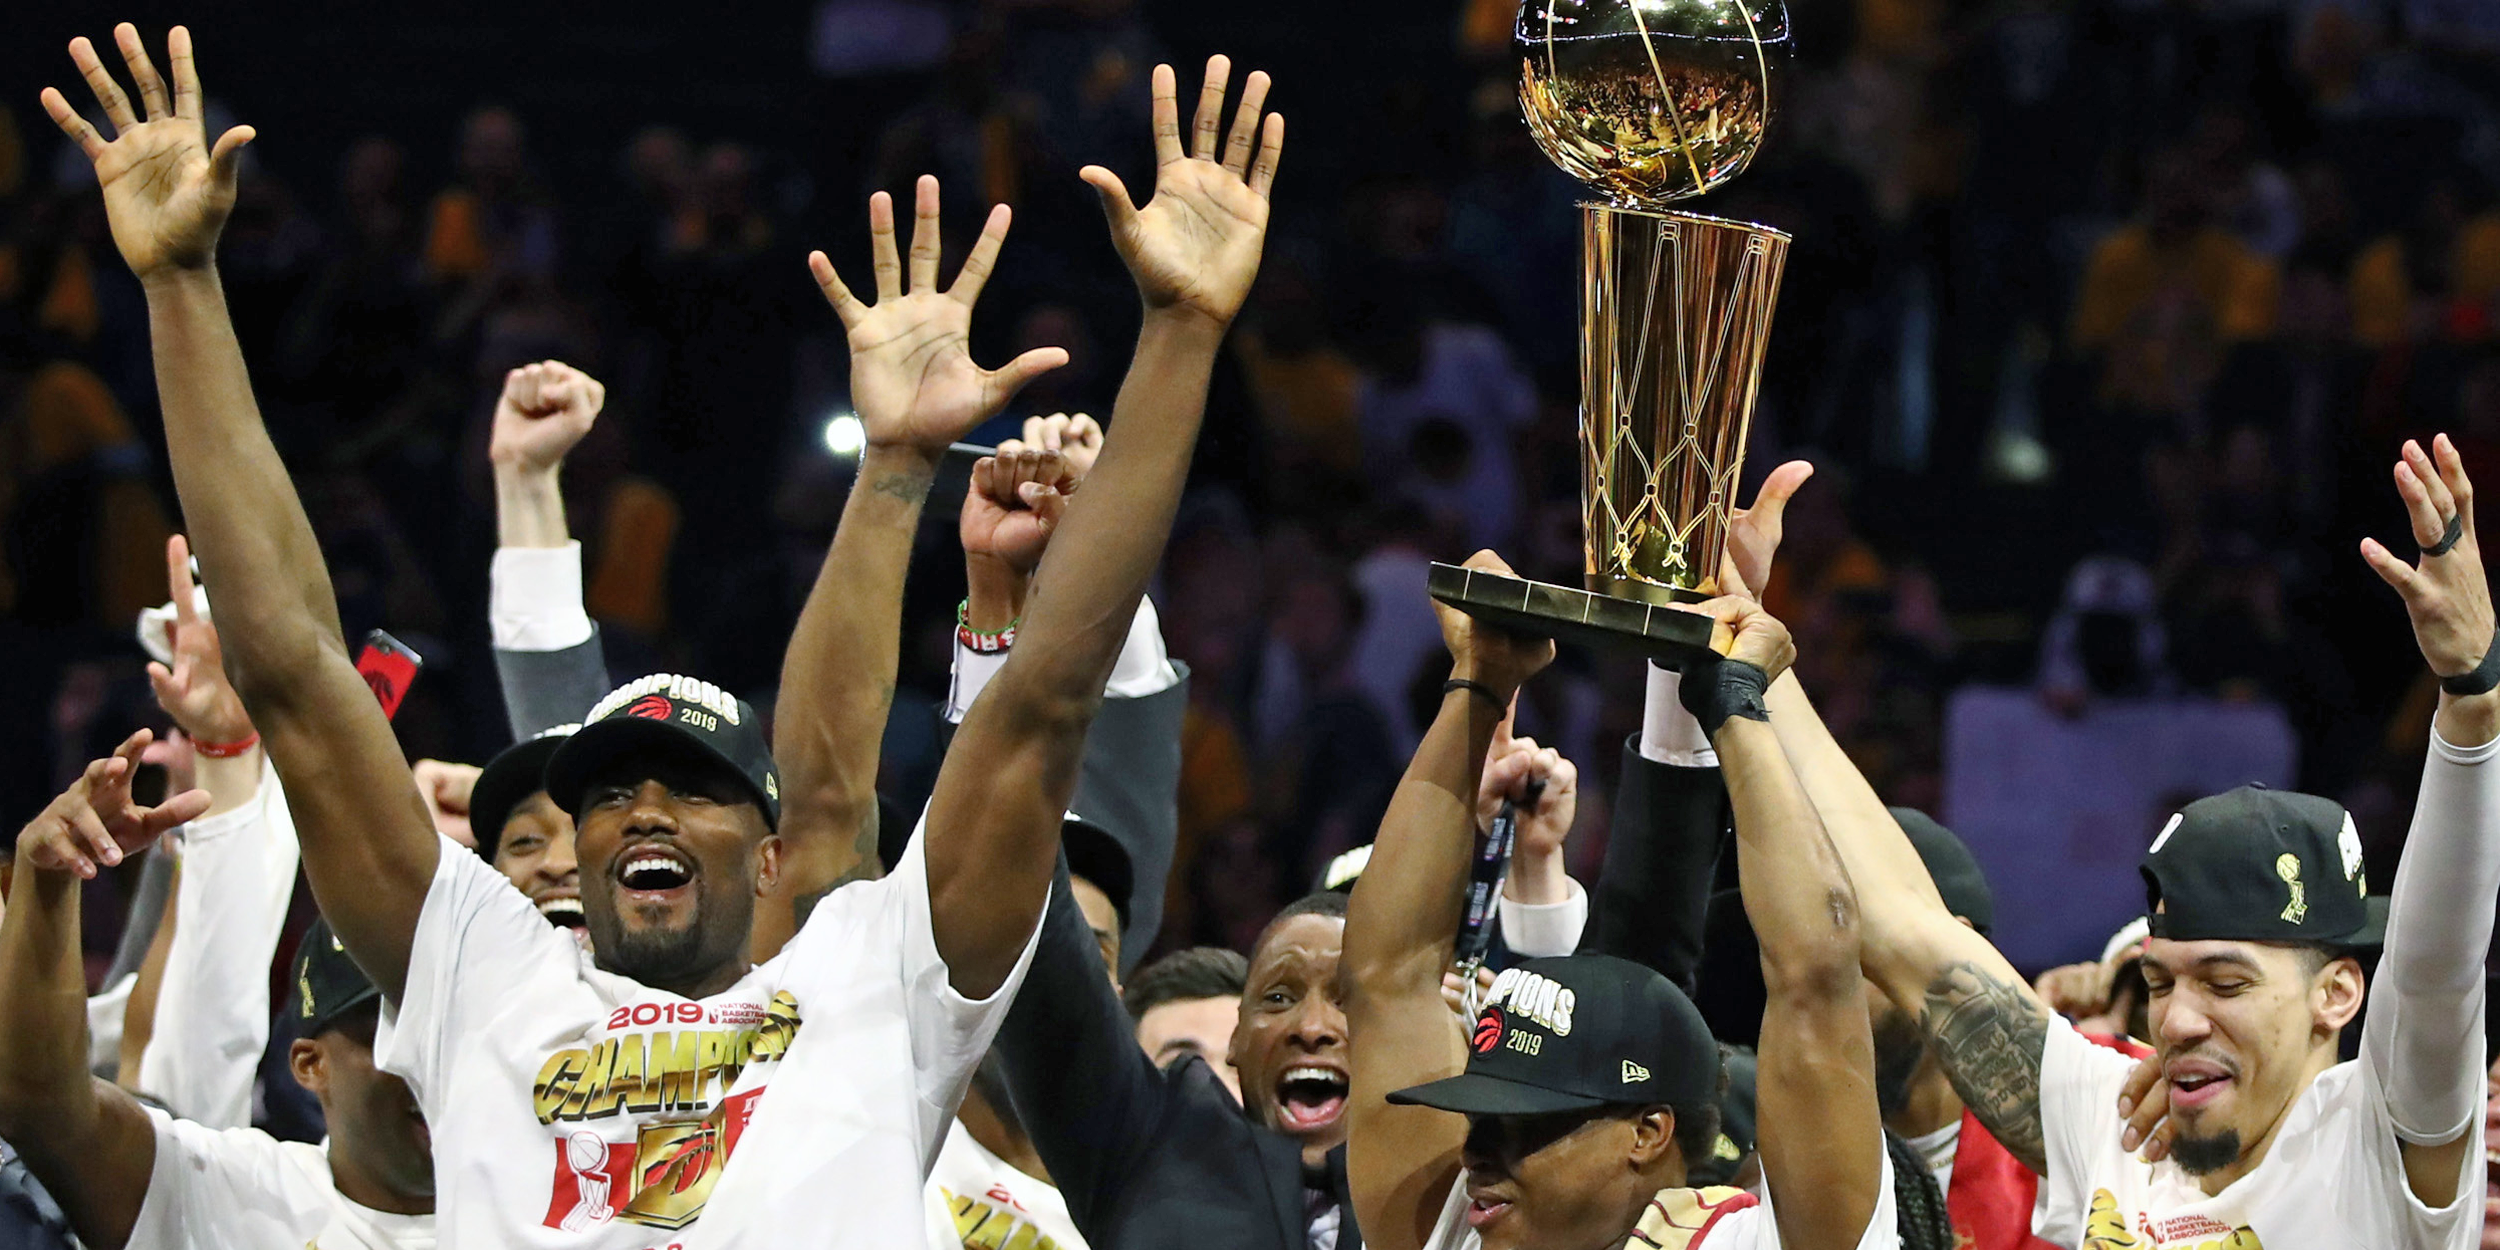 Toronto Raptors win 2019 NBA finals, students say it's refreshing for new  team to take championship